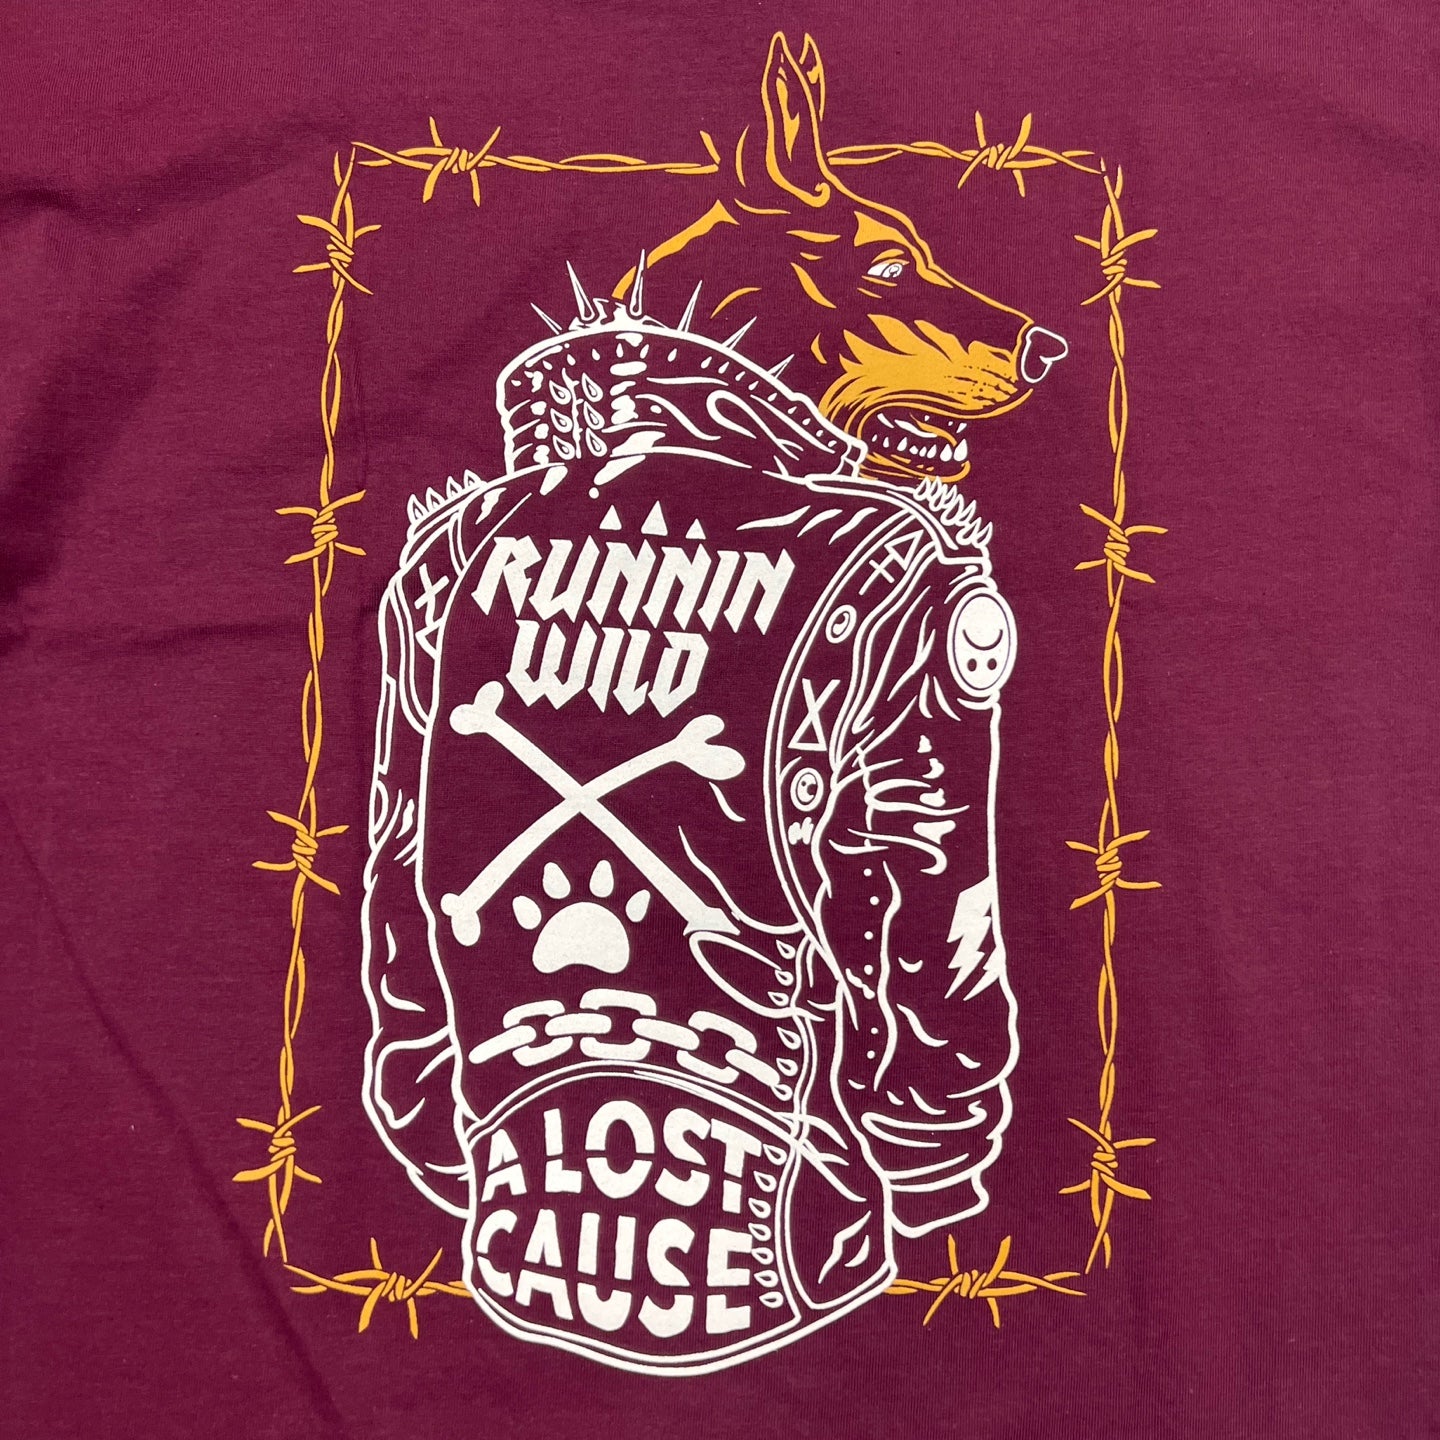 A LOST CAUSE Running Wild Graphic T-Shirt